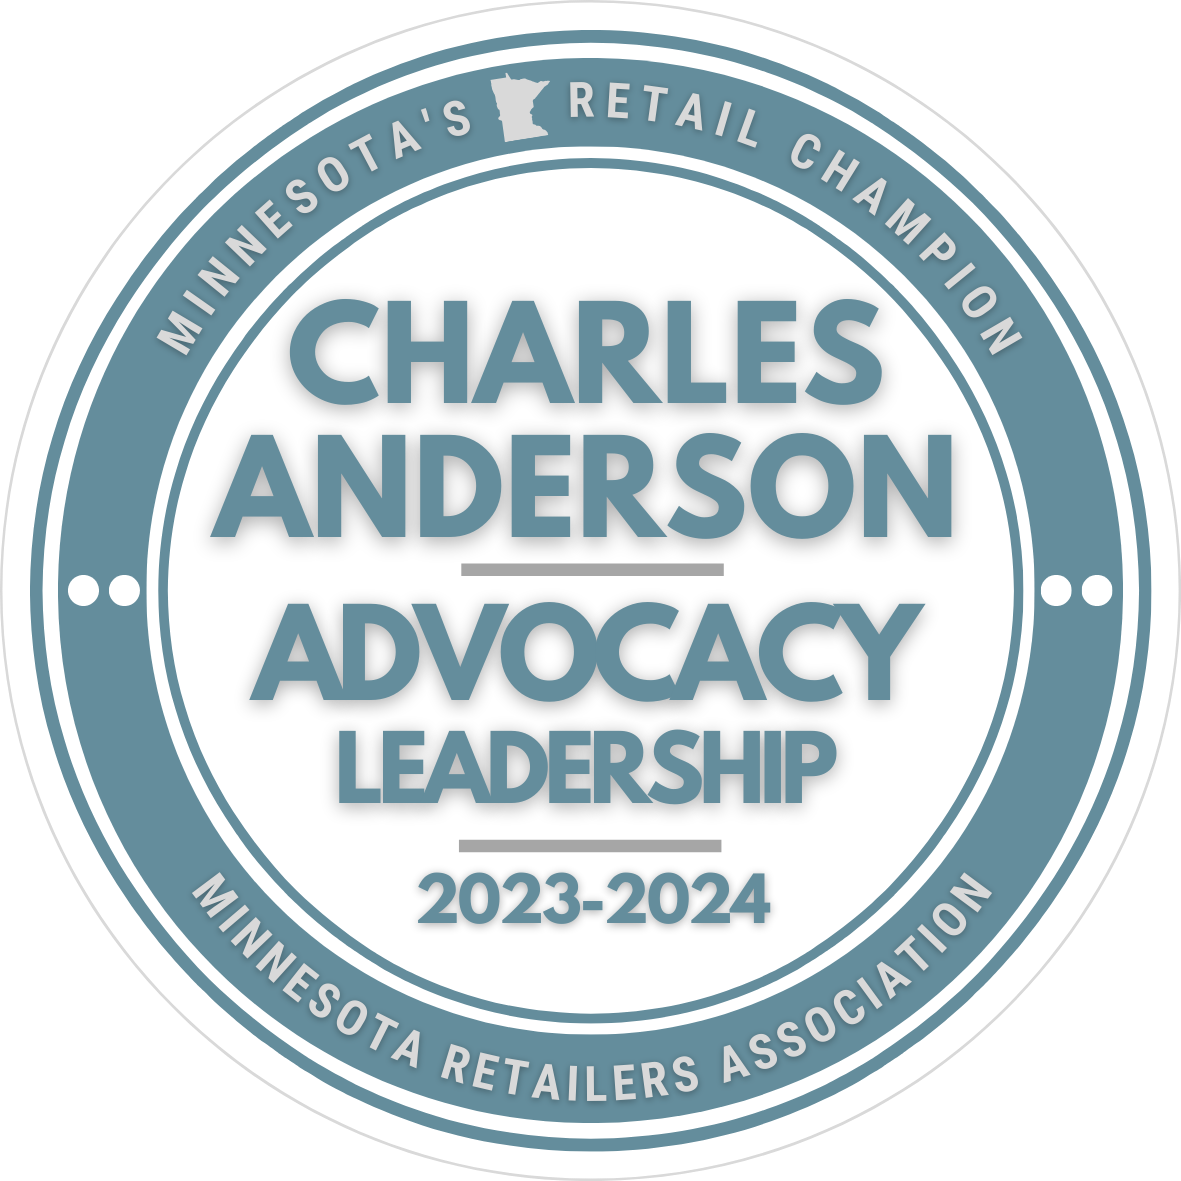 Charles Anderson Advocacy Leadership